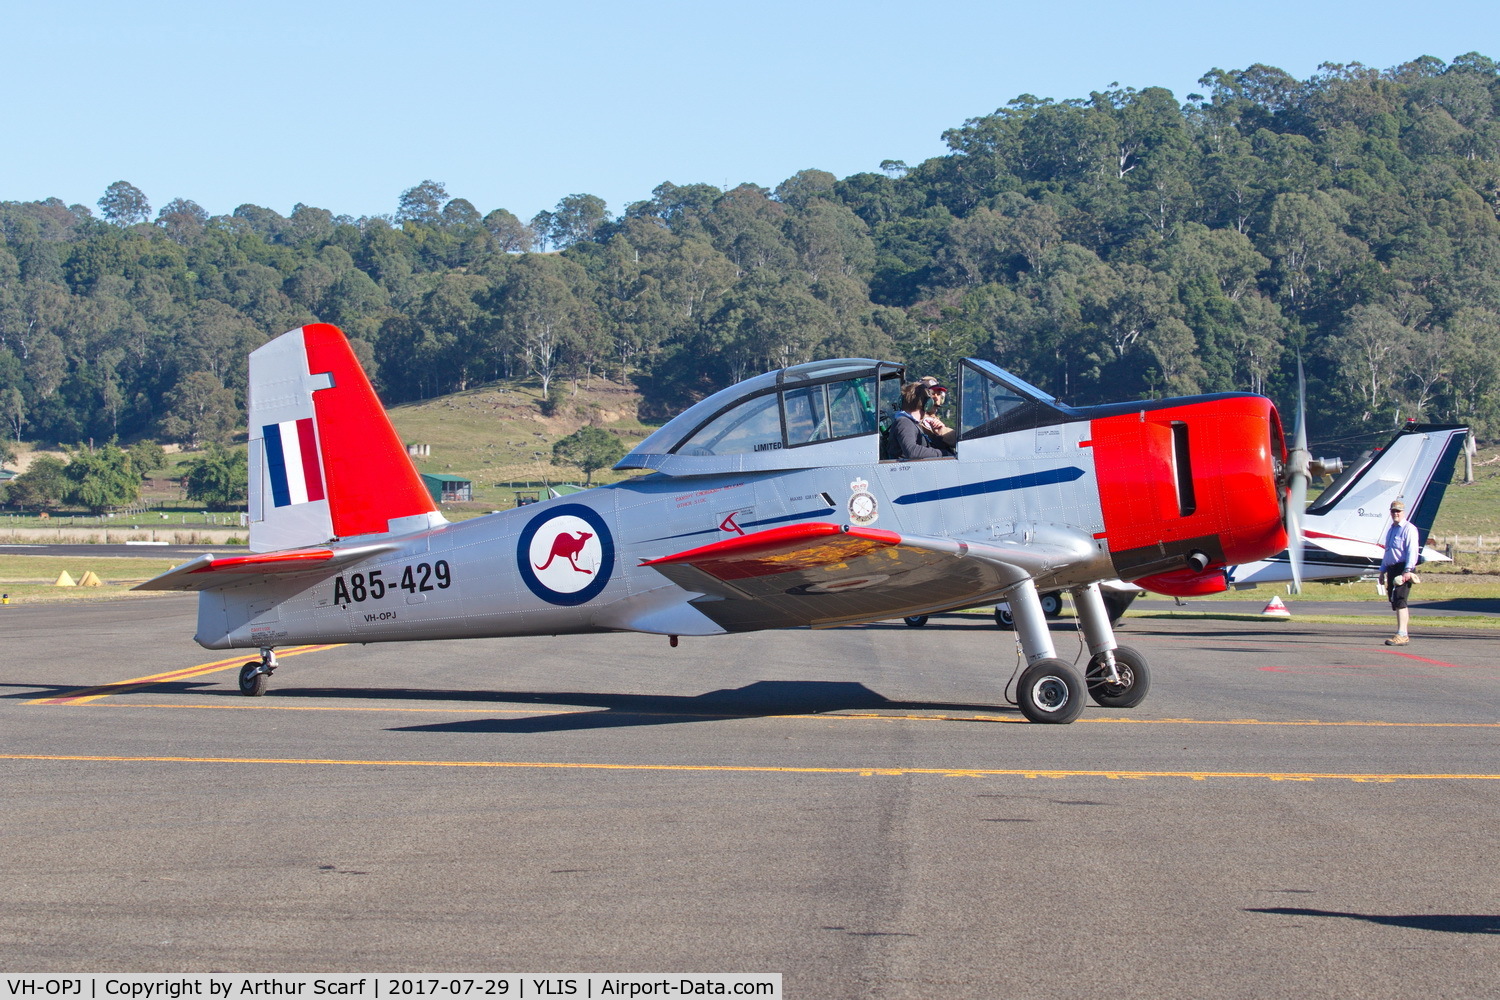 VH-OPJ, 1959 Commonwealth CA-25 Winjeel C/N CA25-29, A85- 429 Lismore NSW Aviation Expo 2017